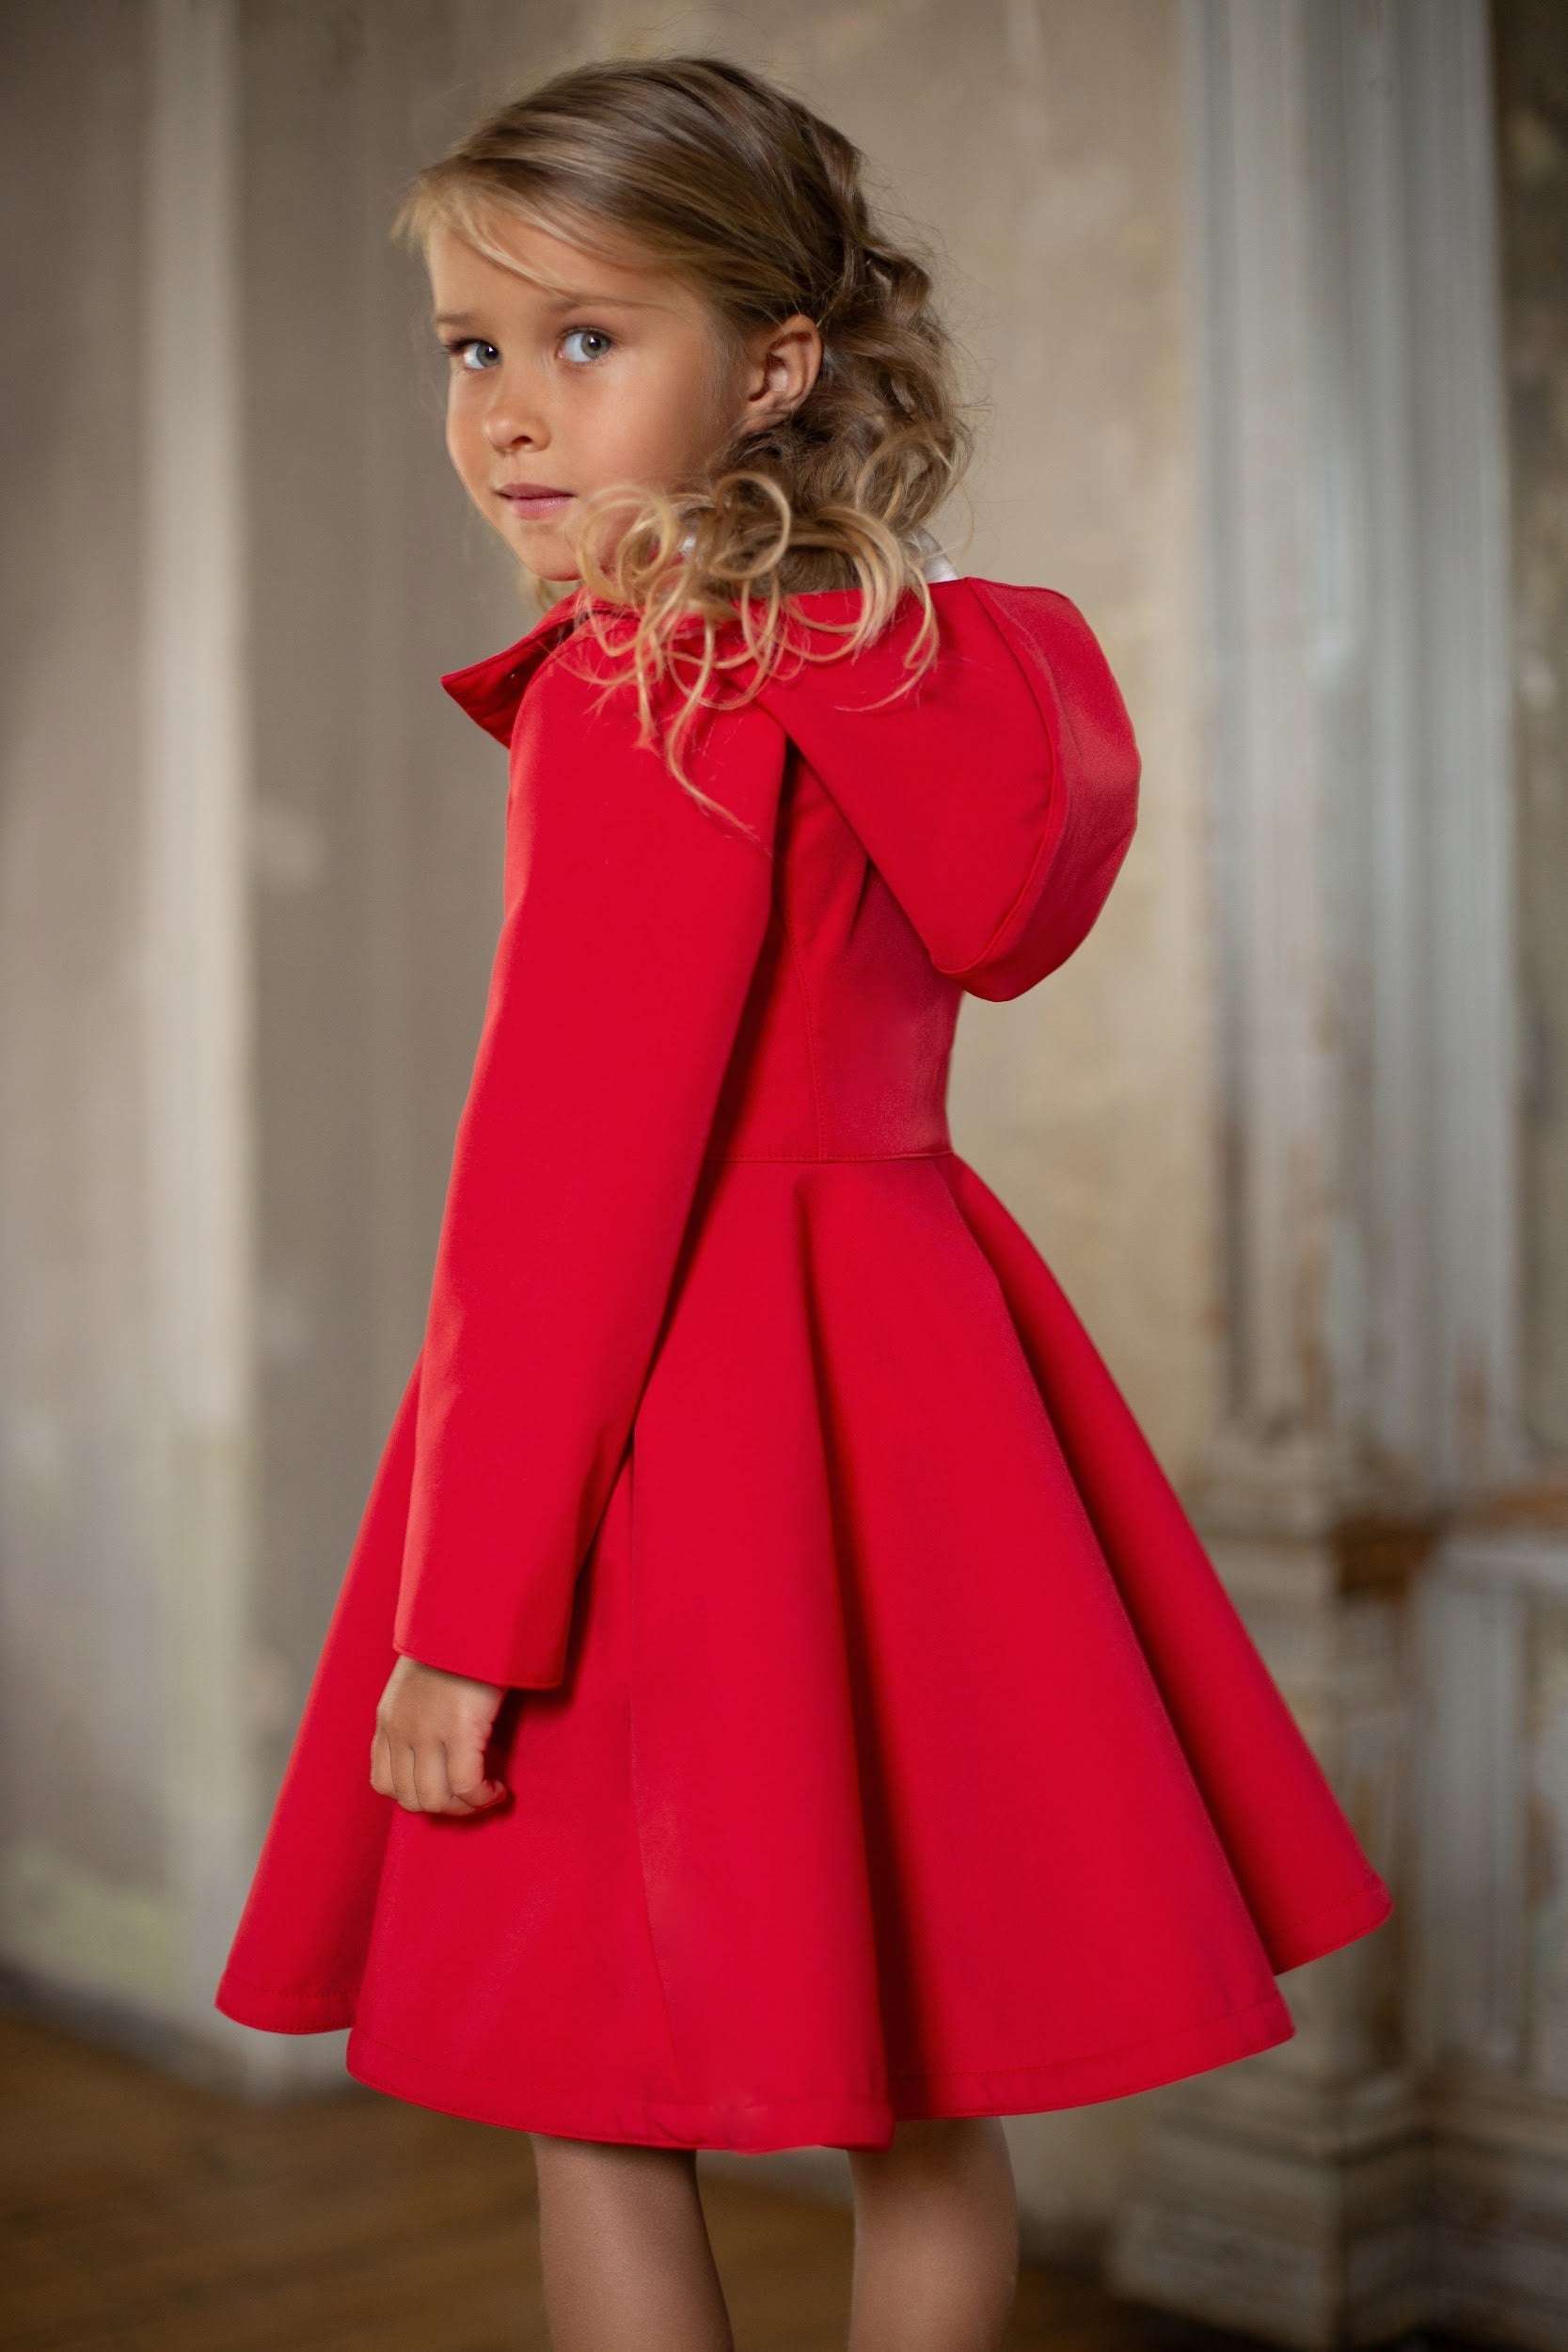 hooded bright red waterproof coat for girls